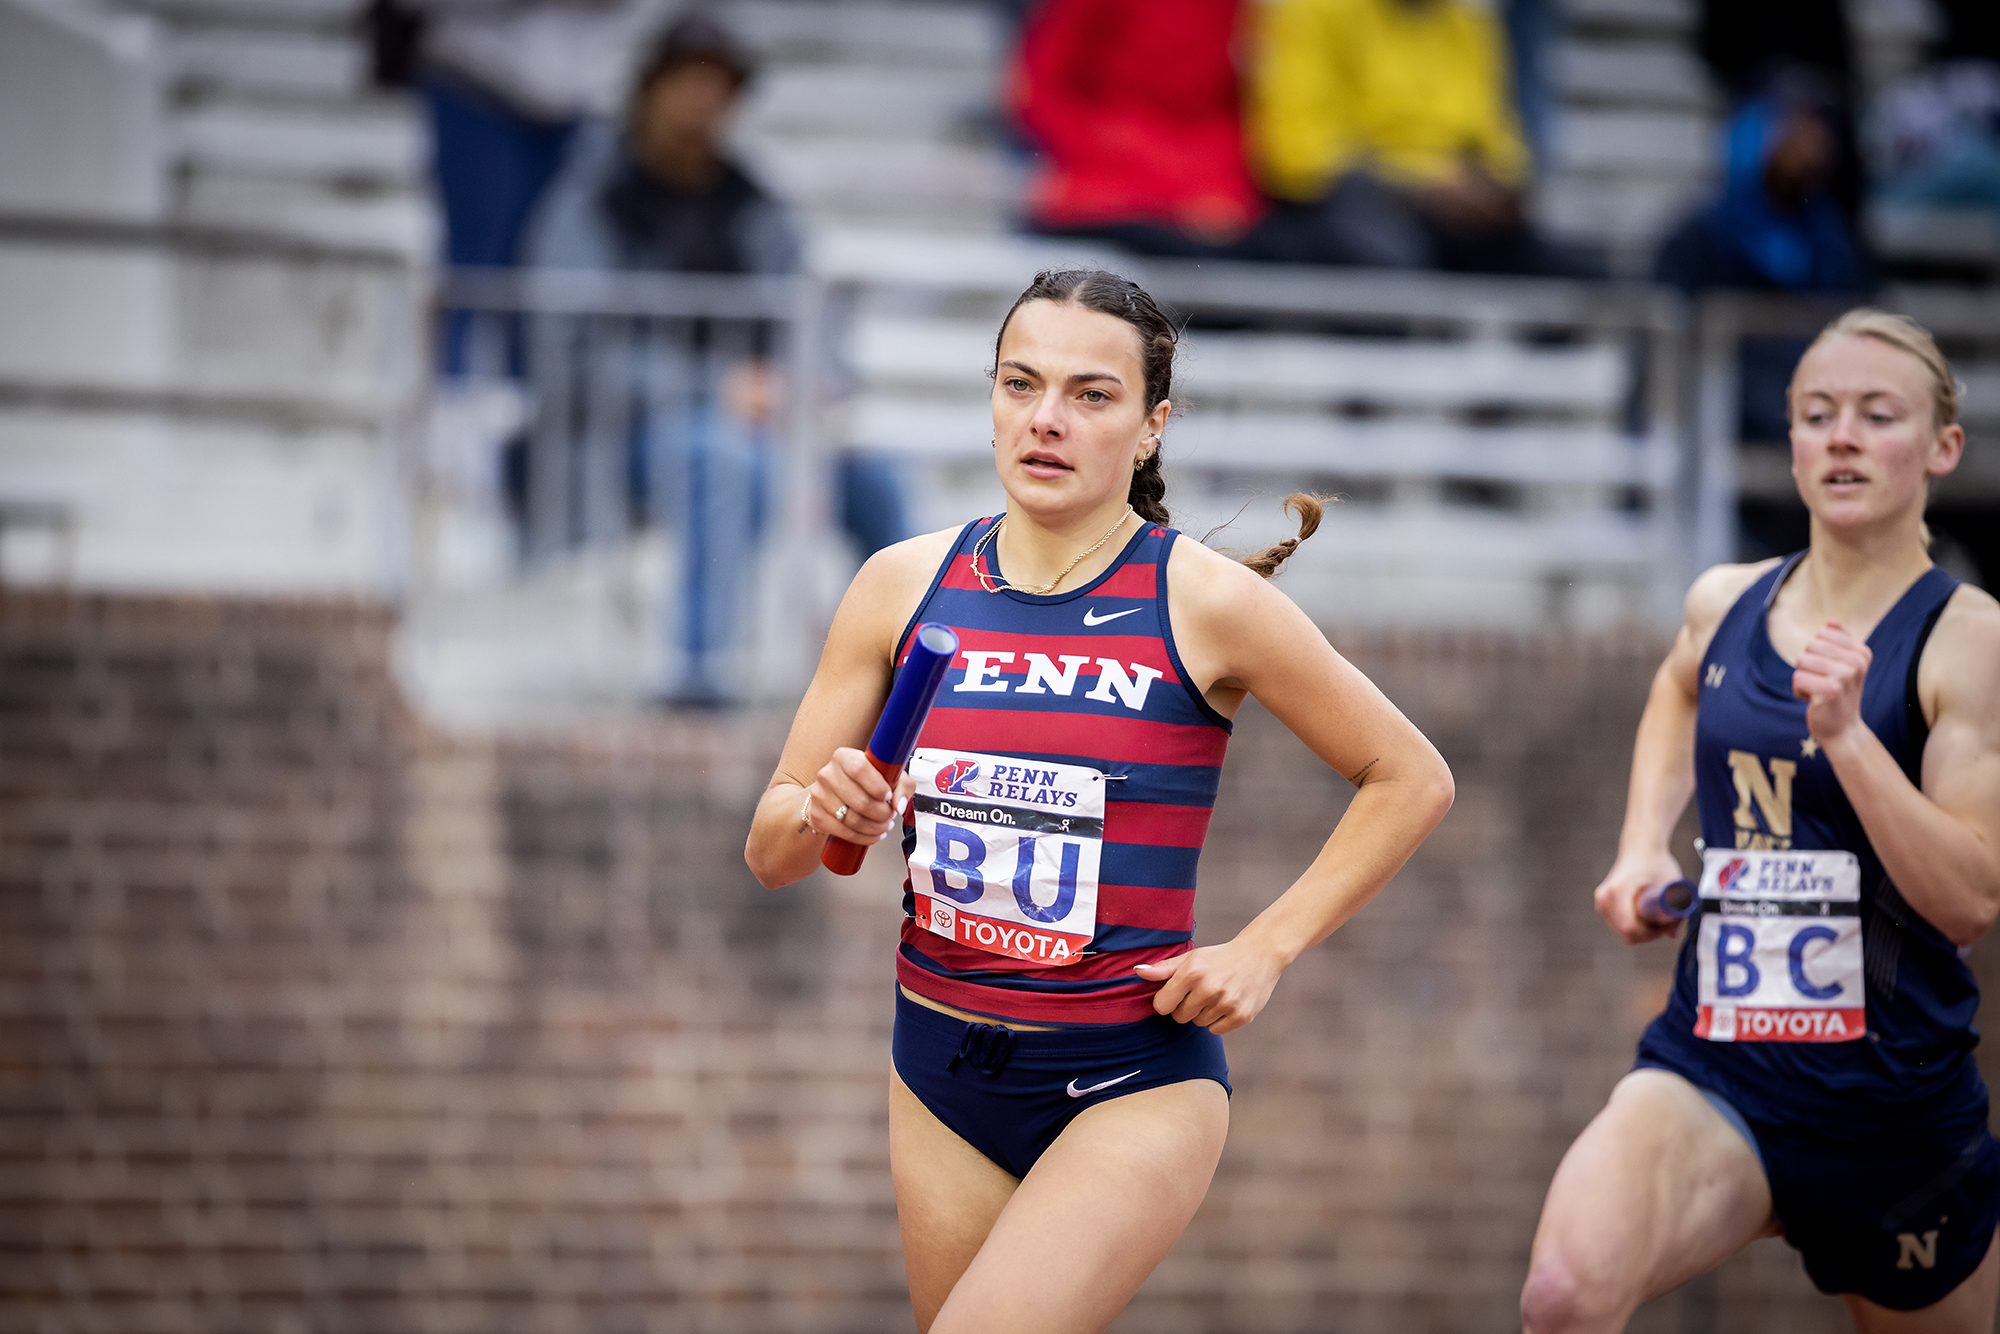 Olivia Morganti, a third-year distance runner from Syracuse, New York, races at the Penn Relays. Morganti, third-year Trinity Eason, second-year Bronwyn Patterson, and third-year Maeve Stiles placed fifth in the College Women’s Distance Medley on Friday with a time of 11:29.66.